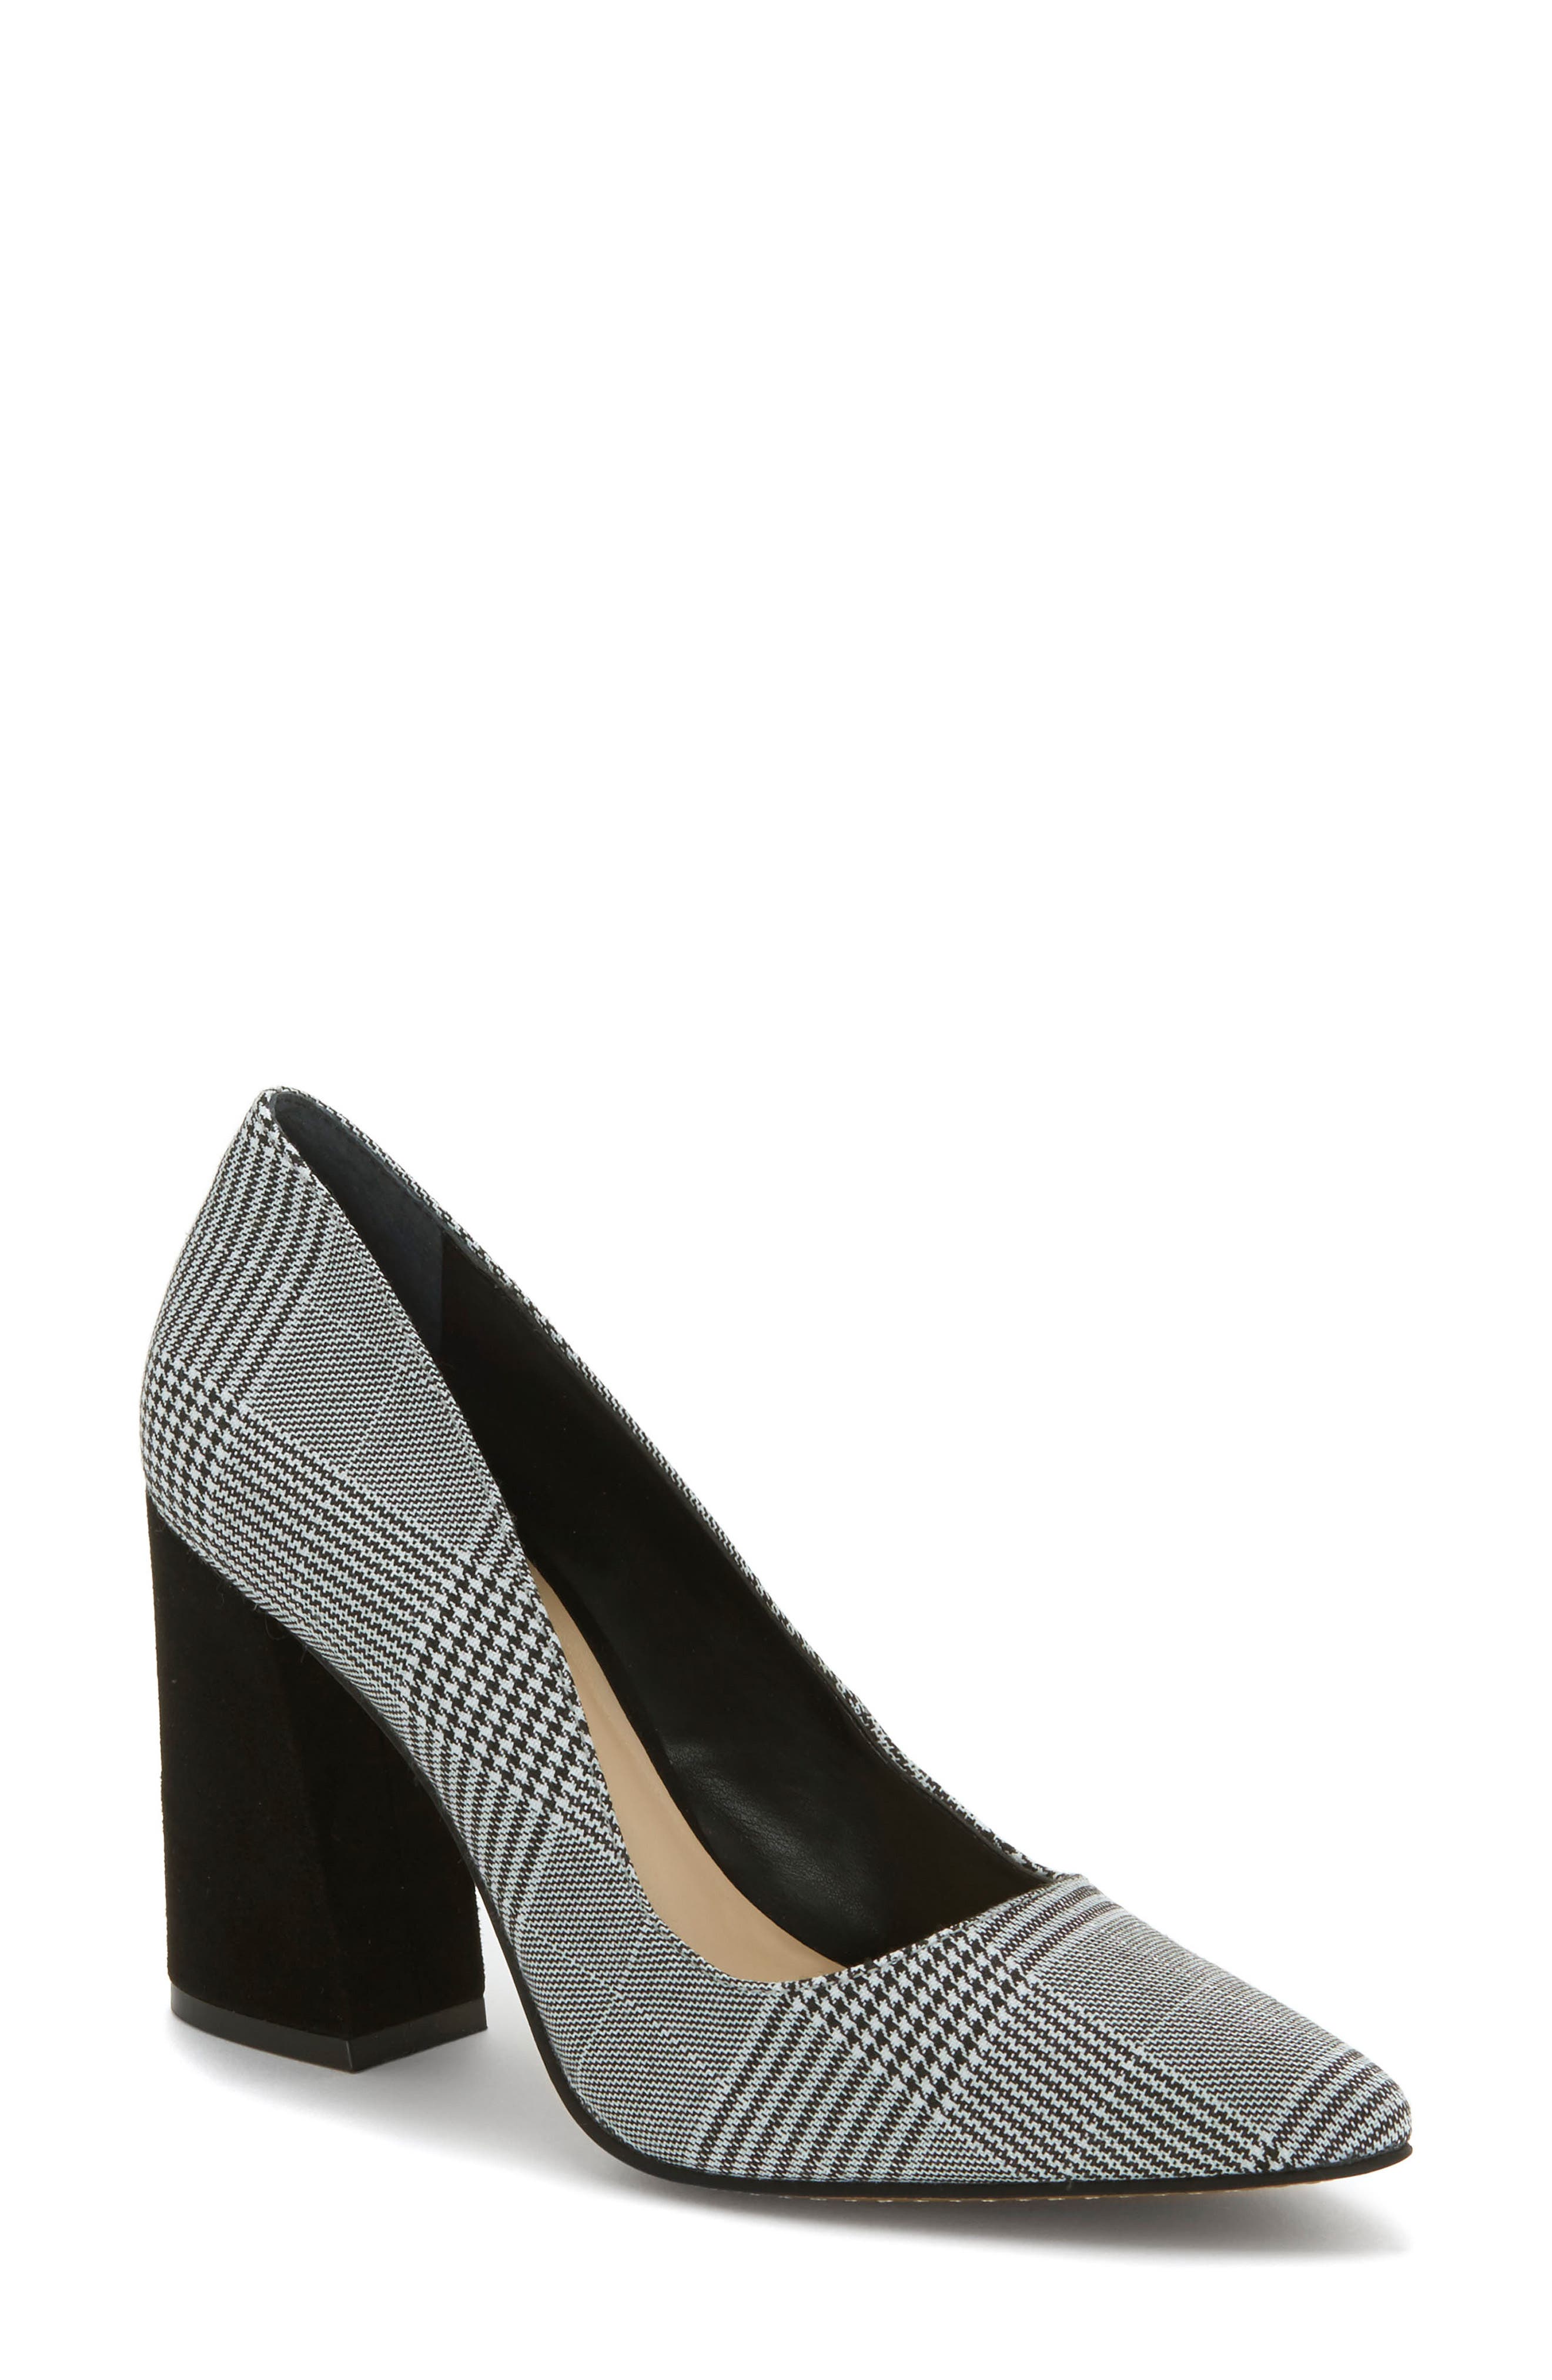 talise pointy toe pump